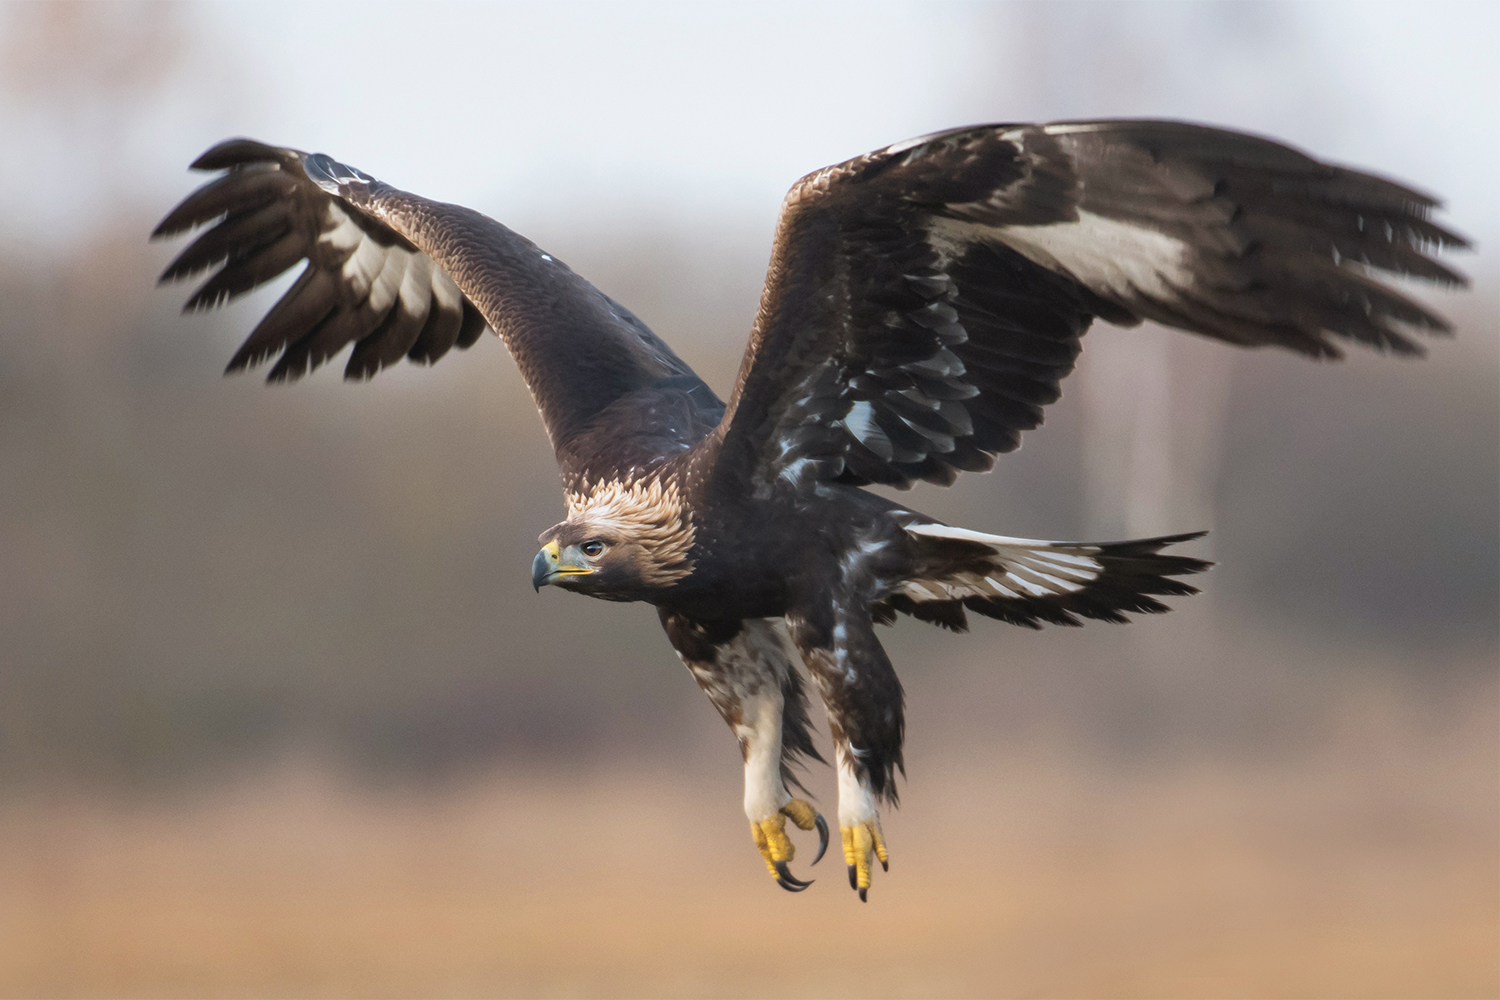 Ash Rewarding Cook Drone-catching Eagles Aren't Such a Good Idea After All | Digital Trends